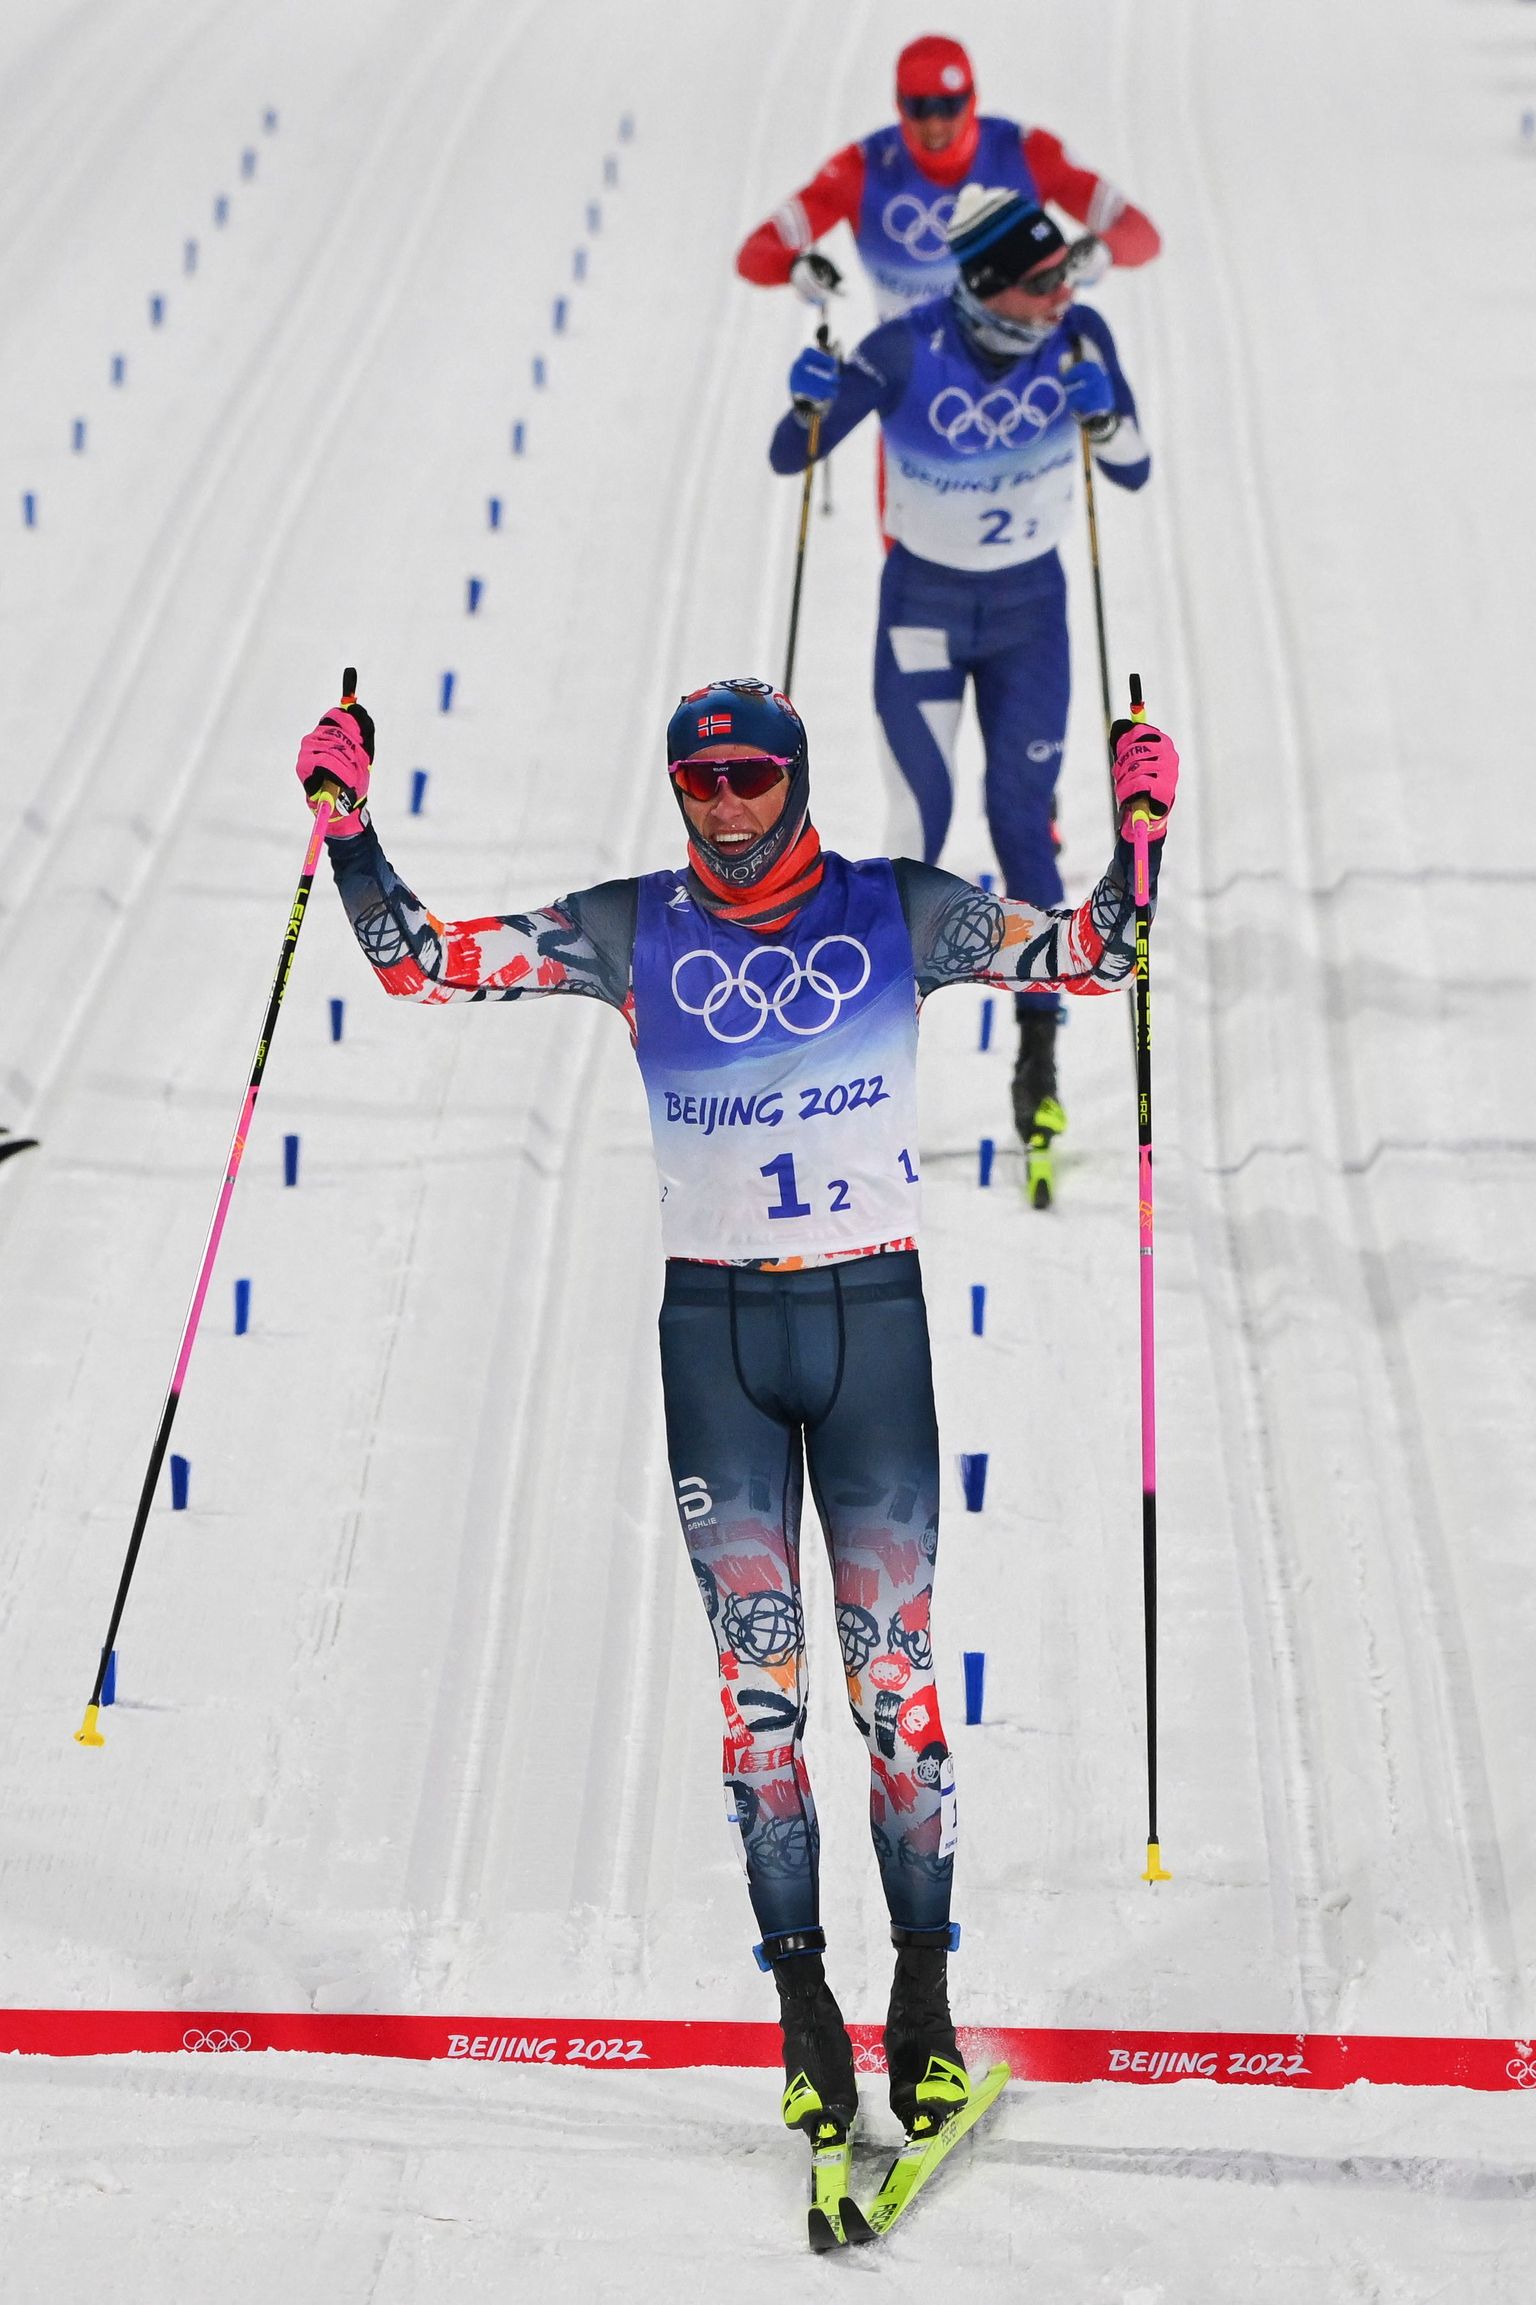 Norway's Johannes Hoesflot Klaebo (Front) celebrates as he crosses the finish line ahead of Finland's Joni Maki (Rear C) for Norway to win the men's team sprint classic final event during the Beijing 2022 Winter Olympic Games on February 16, 2022, at the Zhangjiakou National Cross-Country Skiing Centre. (Photo by Pierre-Philippe MARCOU / AFP)